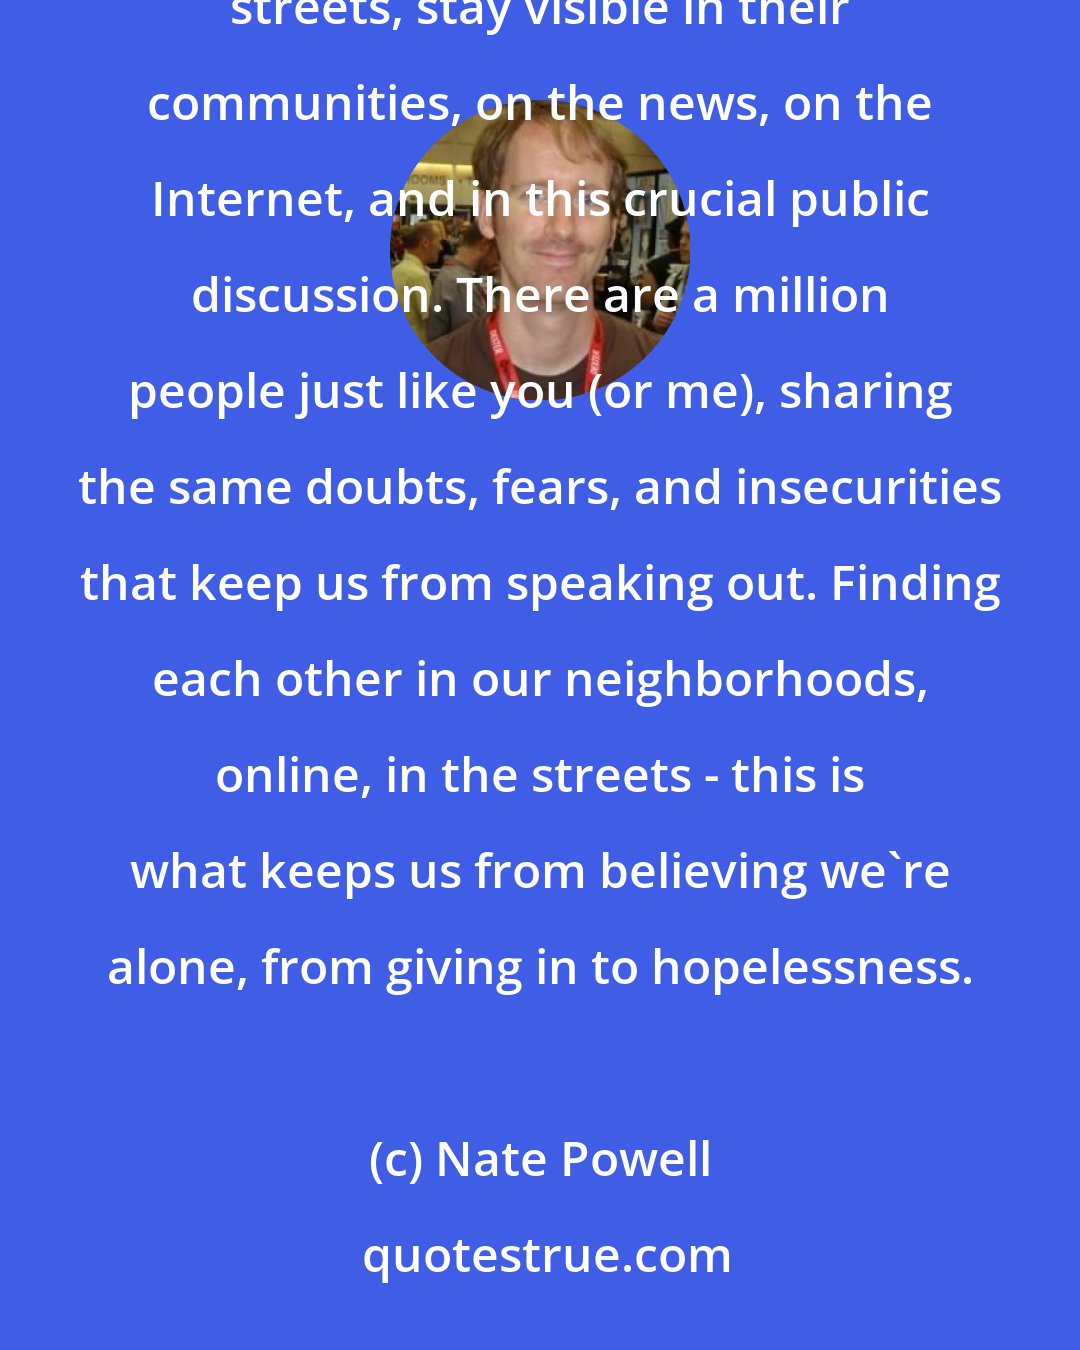 Nate Powell: The rules have changed as information and technology evolve, but it's essential that people stay in the streets, stay visible in their communities, on the news, on the Internet, and in this crucial public discussion. There are a million people just like you (or me), sharing the same doubts, fears, and insecurities that keep us from speaking out. Finding each other in our neighborhoods, online, in the streets - this is what keeps us from believing we're alone, from giving in to hopelessness.